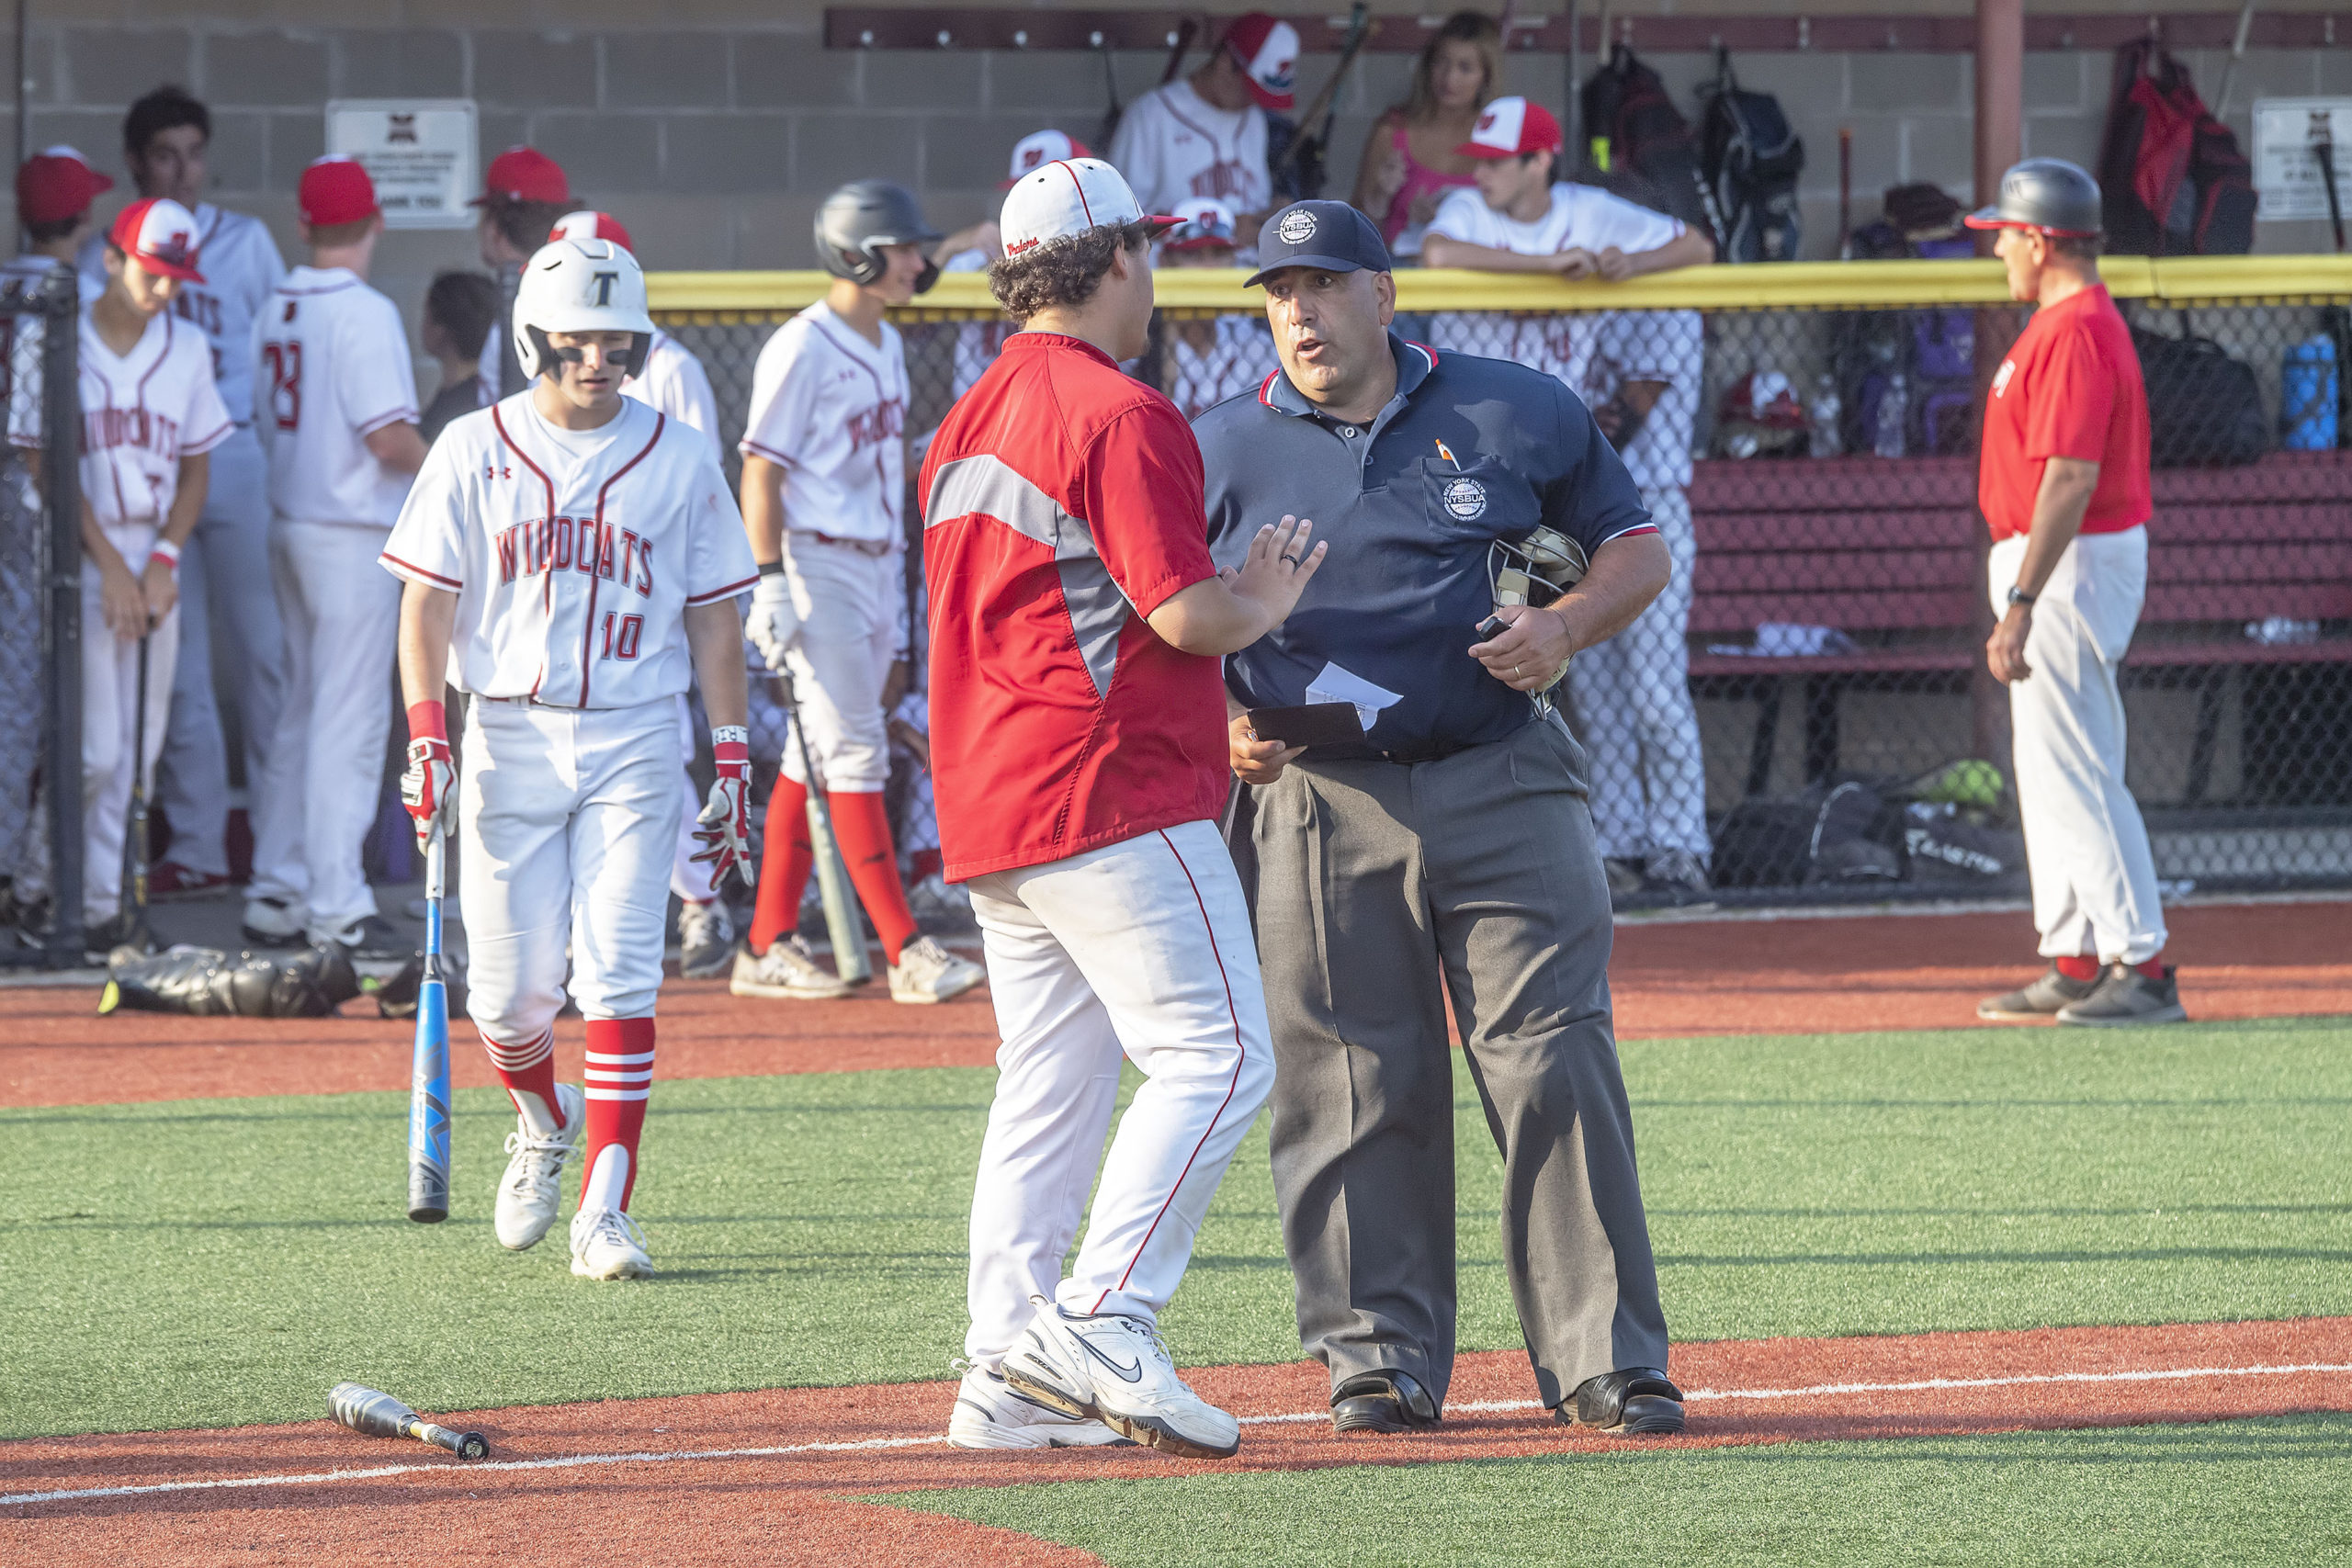 Pierson coach Tyler LaBorne talks with the home plate umpire regarding the ejection of a Wheatley player.